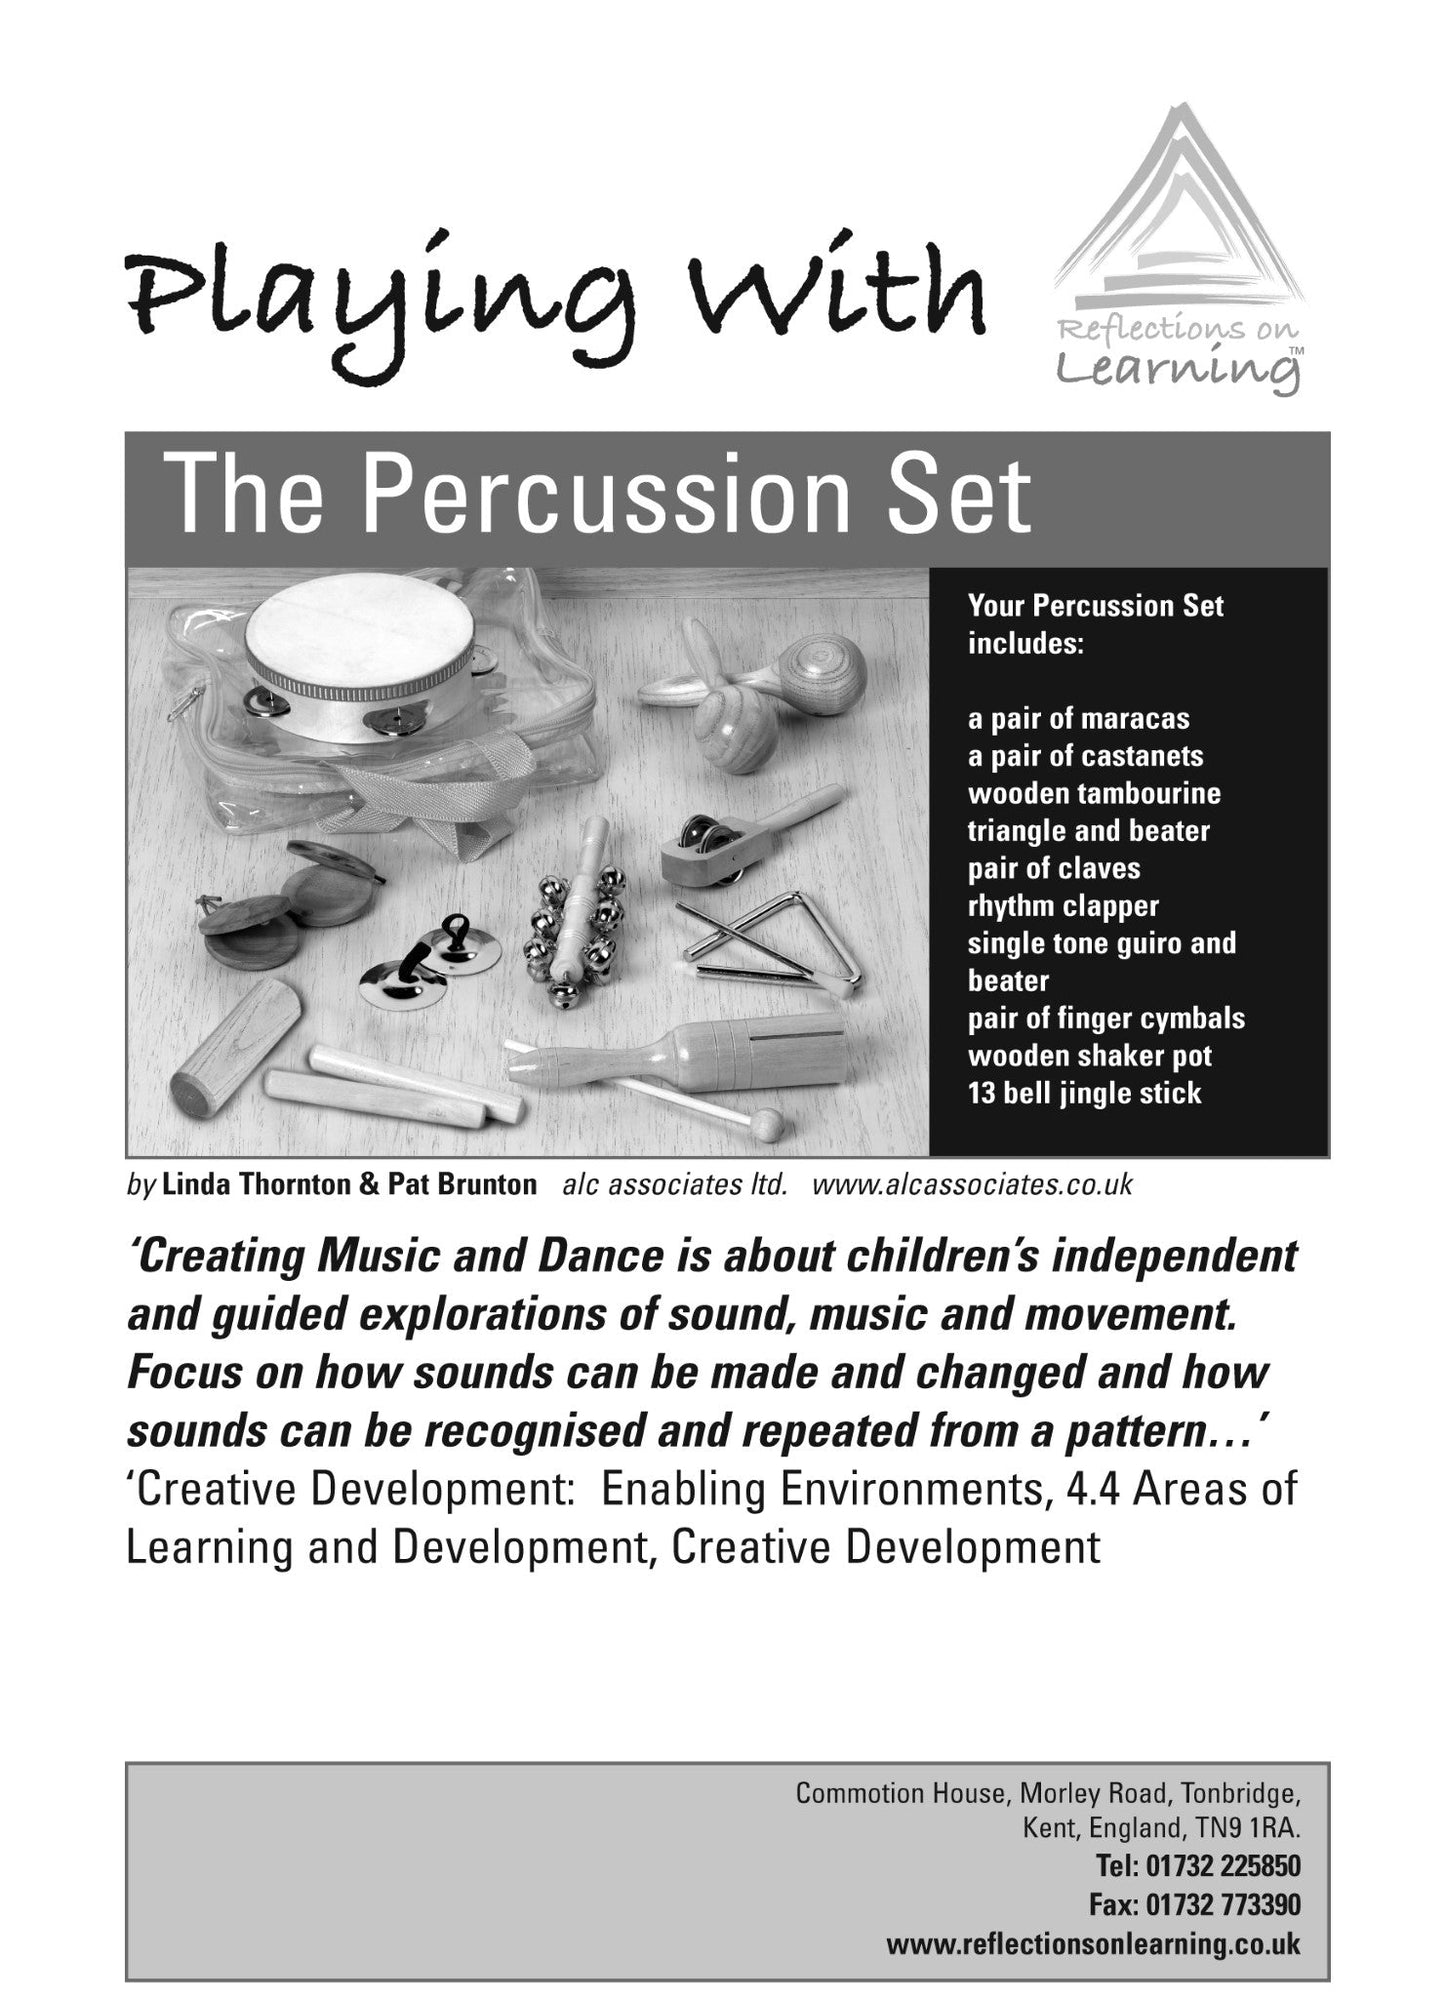 Tickit - Percussion Set - Playlaan